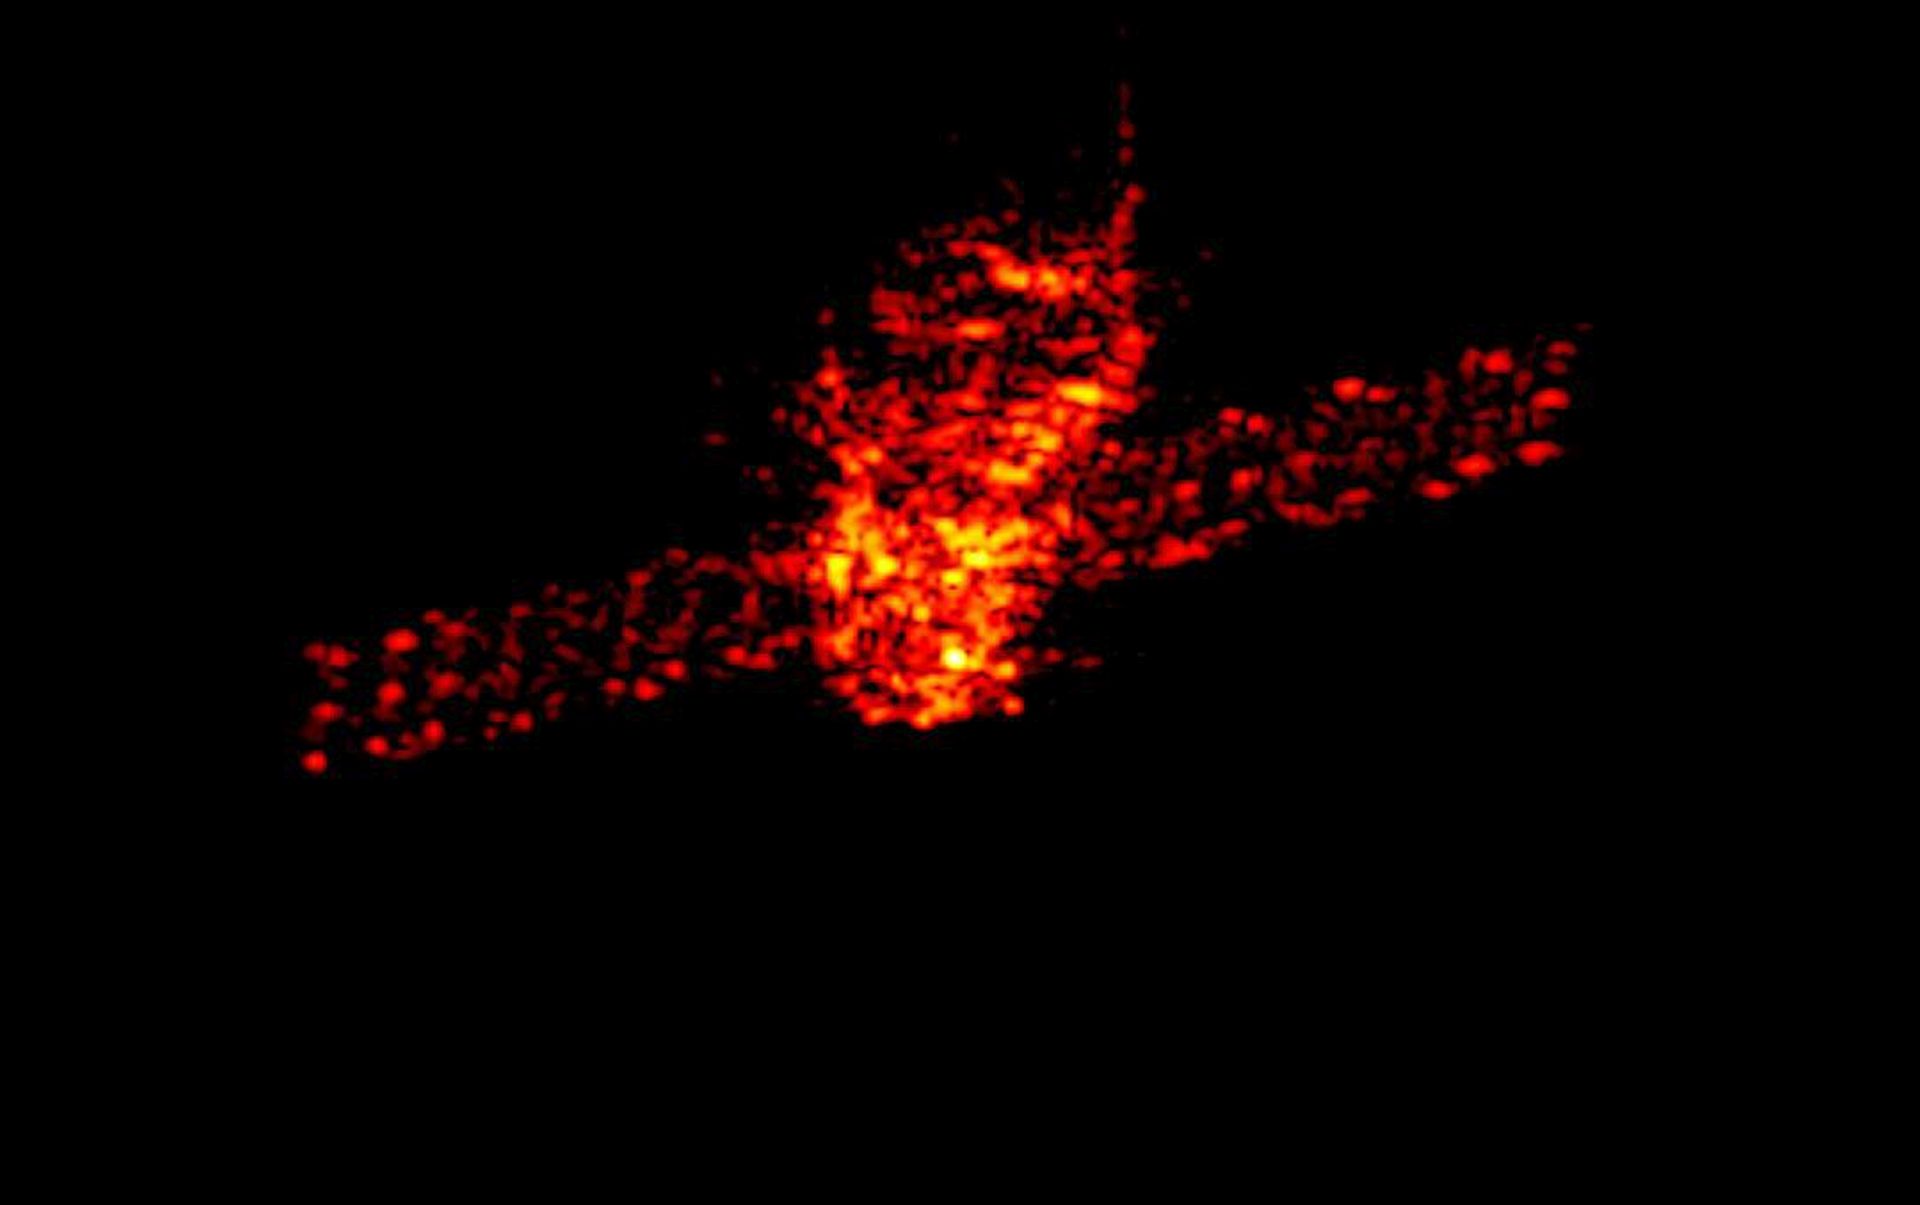 epa06639046 An undated handout photo made available by the Fraunhofer Institute for High Frequency Physics and Radar Techniques (Fraunhofer FHR) on 21 March 2018 shows a radar image of Tiangong-1 from different perspectives taken at an orbital height of approximental 270 km above the Earth's surface (issed 31 March 2018). Chinese space station Tiangong-1 will re-enter the Earth's atmosphere where it will to a large extent burn up. Tiangong-1 is orbiting the Earth uncontrolled. Currently the prognosis relating to the time of impact currently lies within a window of several days.  EPA/FRAUNHOFER FHR / HANDOUT MANDATORY CREDIT: FRAUNHOFER FHR HANDOUT EDITORIAL USE ONLY/NO SALES